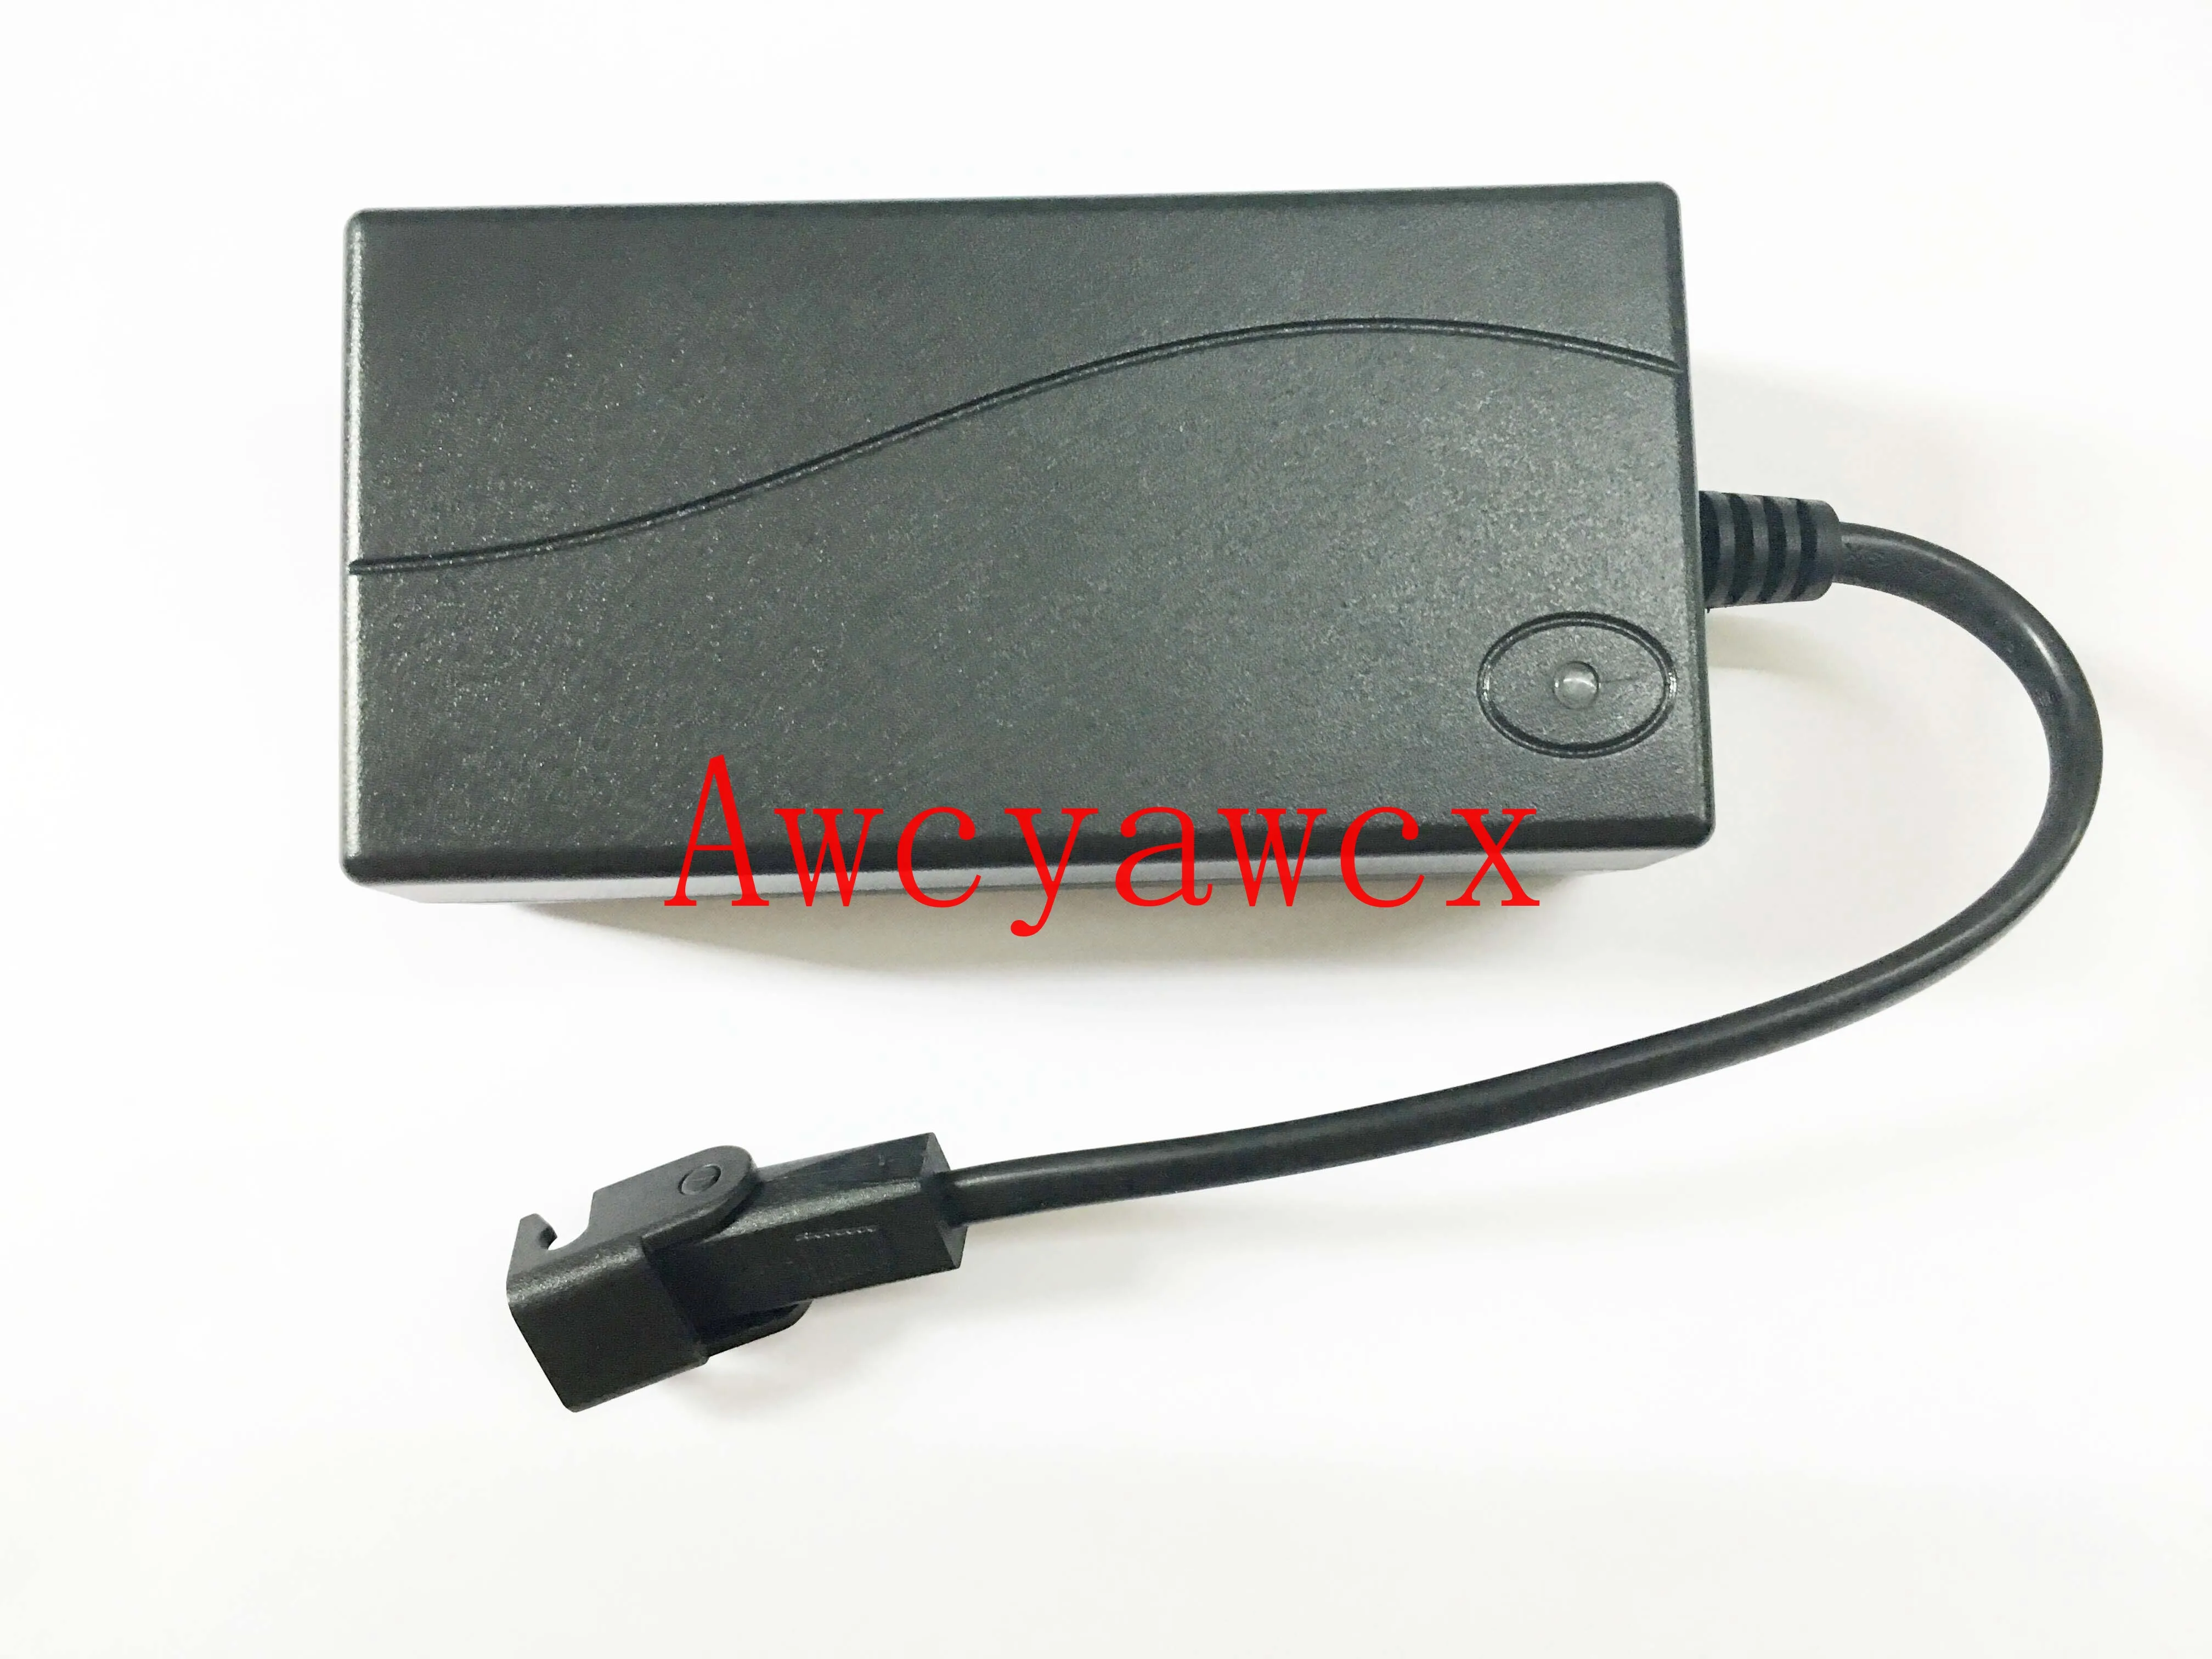 Lift Chair Power Recliner Sofa AC DC Switching Power Supply Transformer adapter 